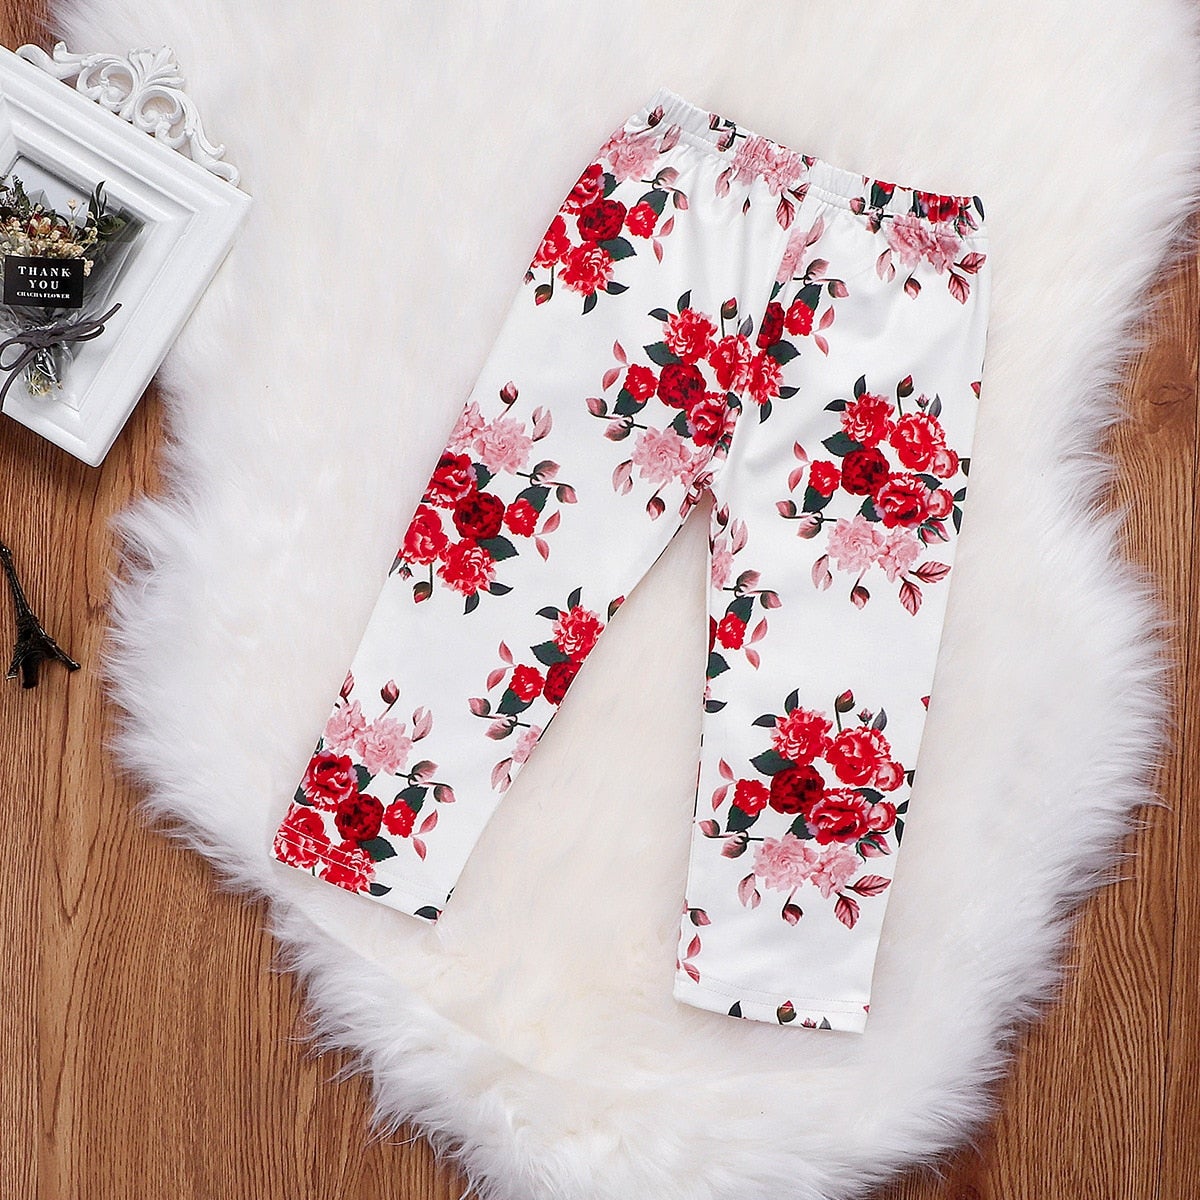 Kid Baby Girl Valentine's Day Red Floral Heart 2 Pcs Sets